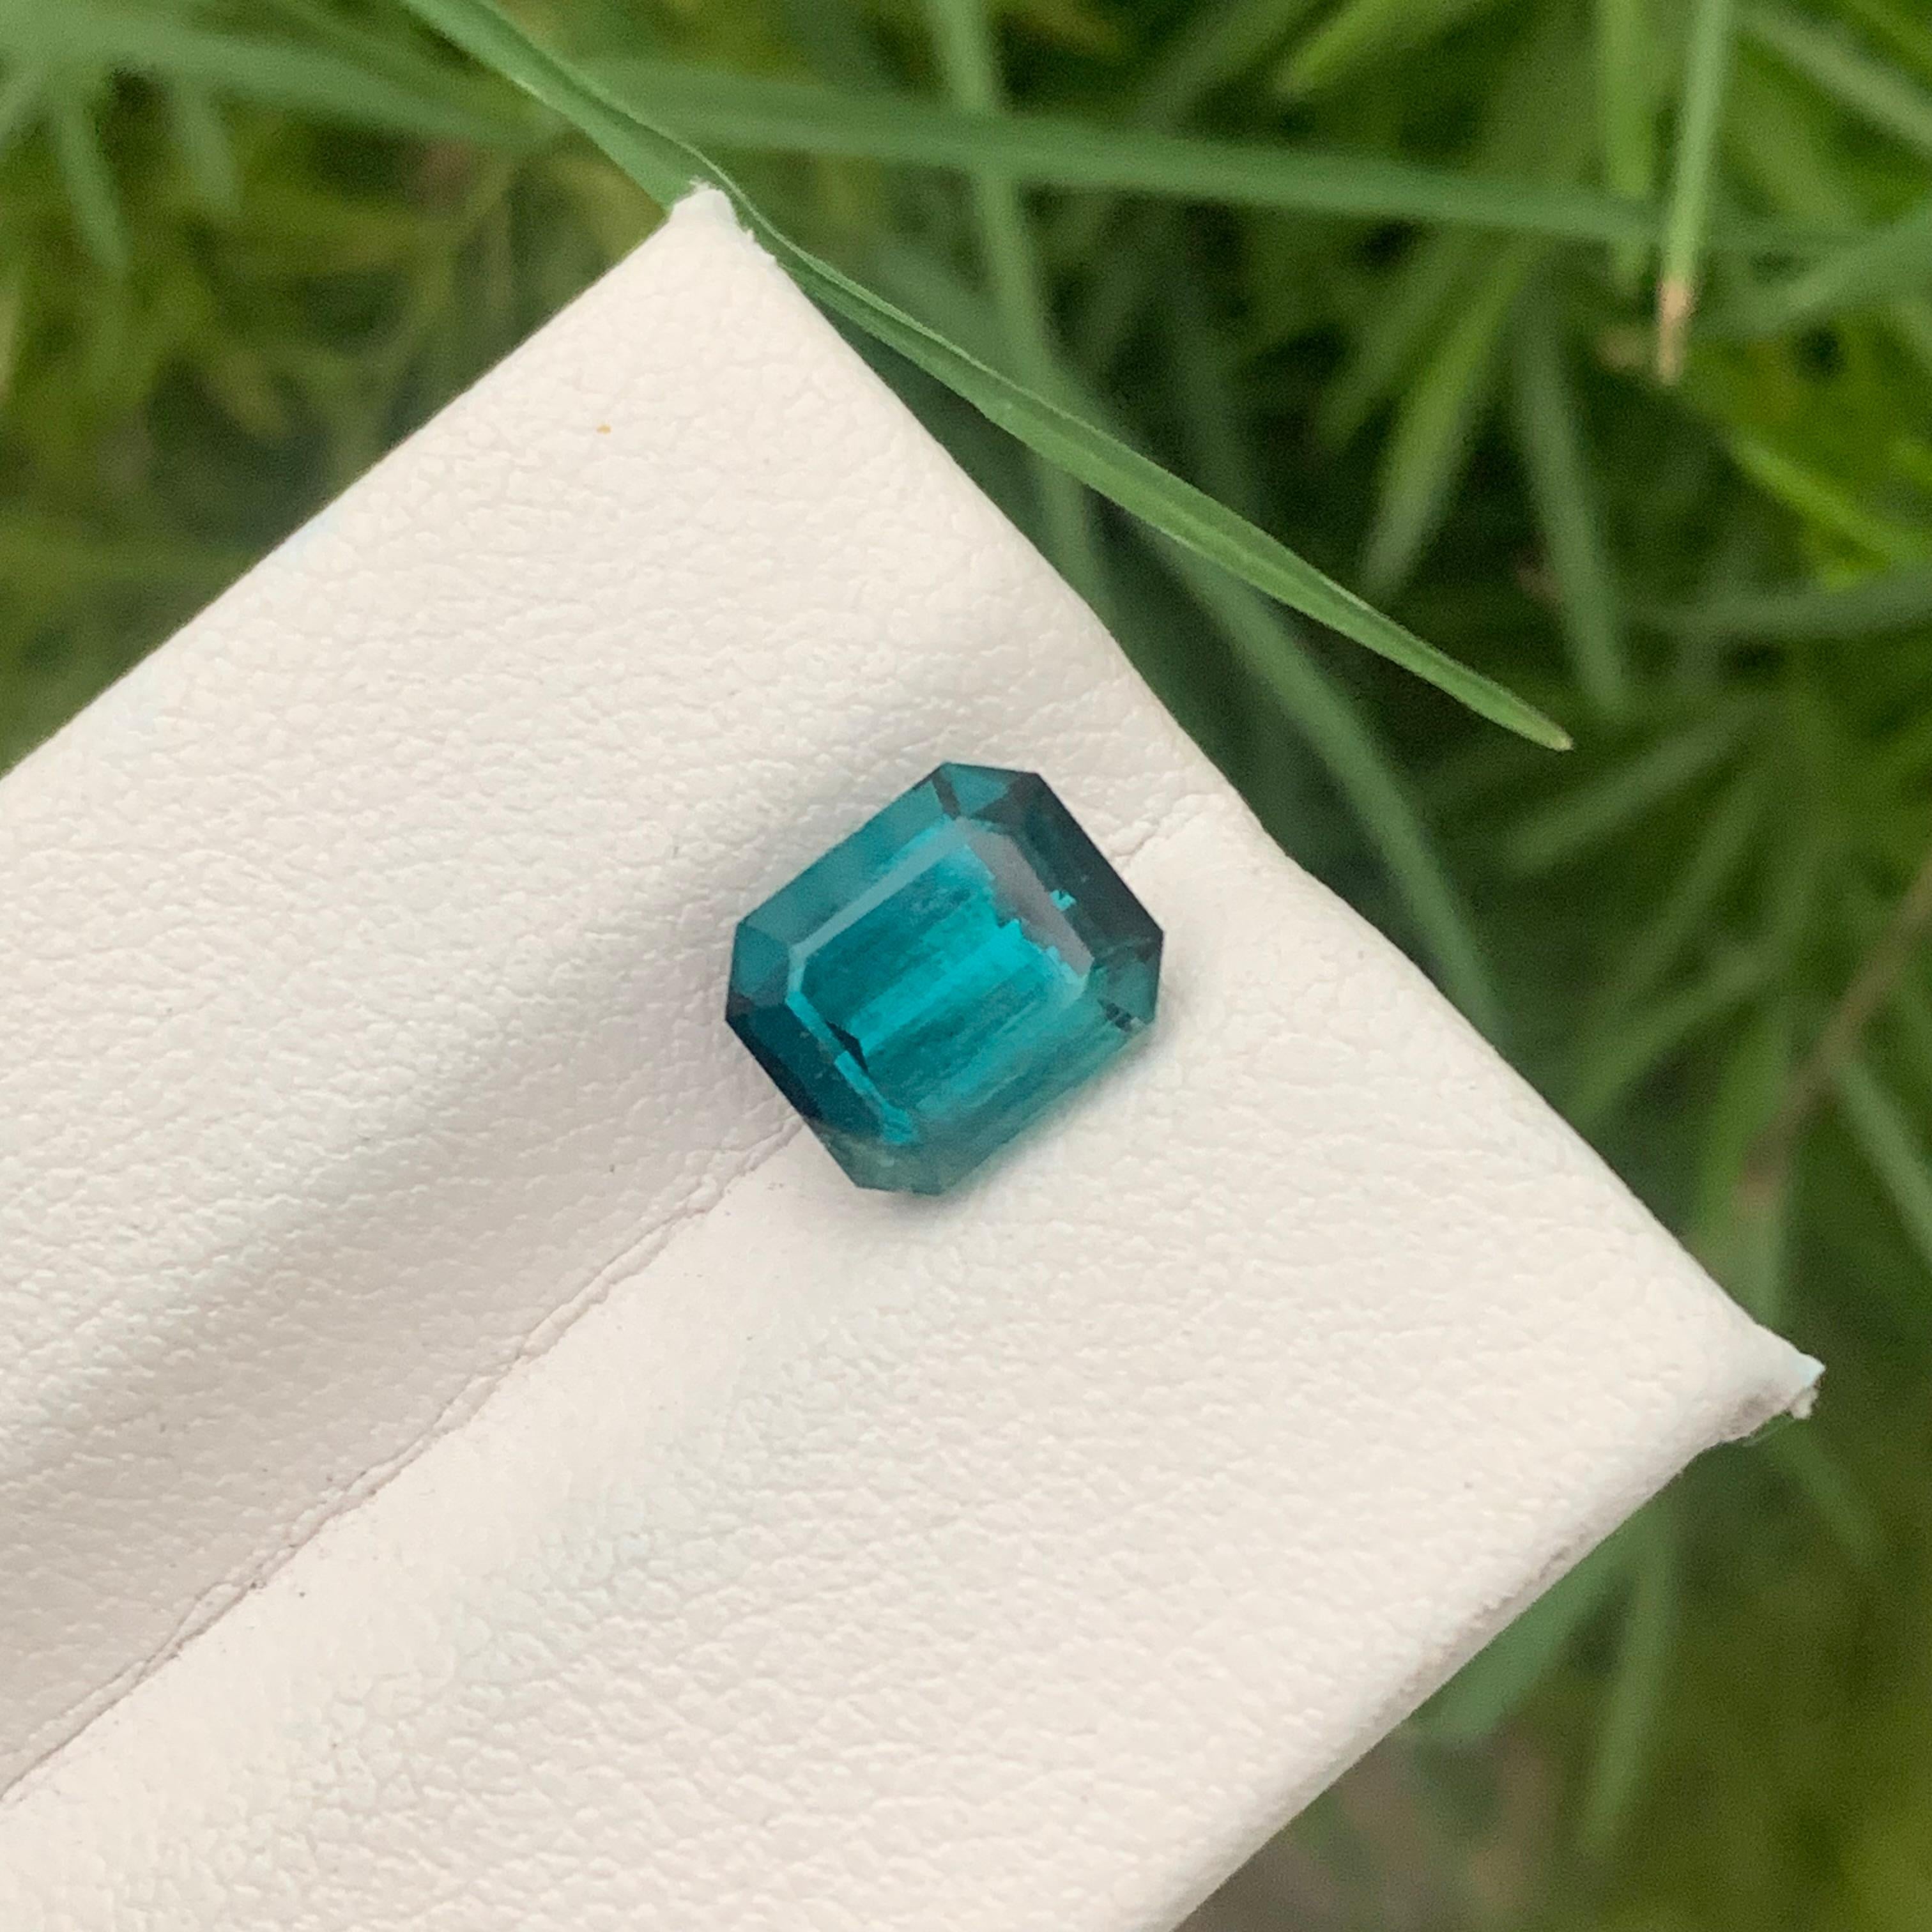 2.75 Carat Included Natural Loose Indicolite Tourmaline Emerald Cut Ring Gem For Sale 6